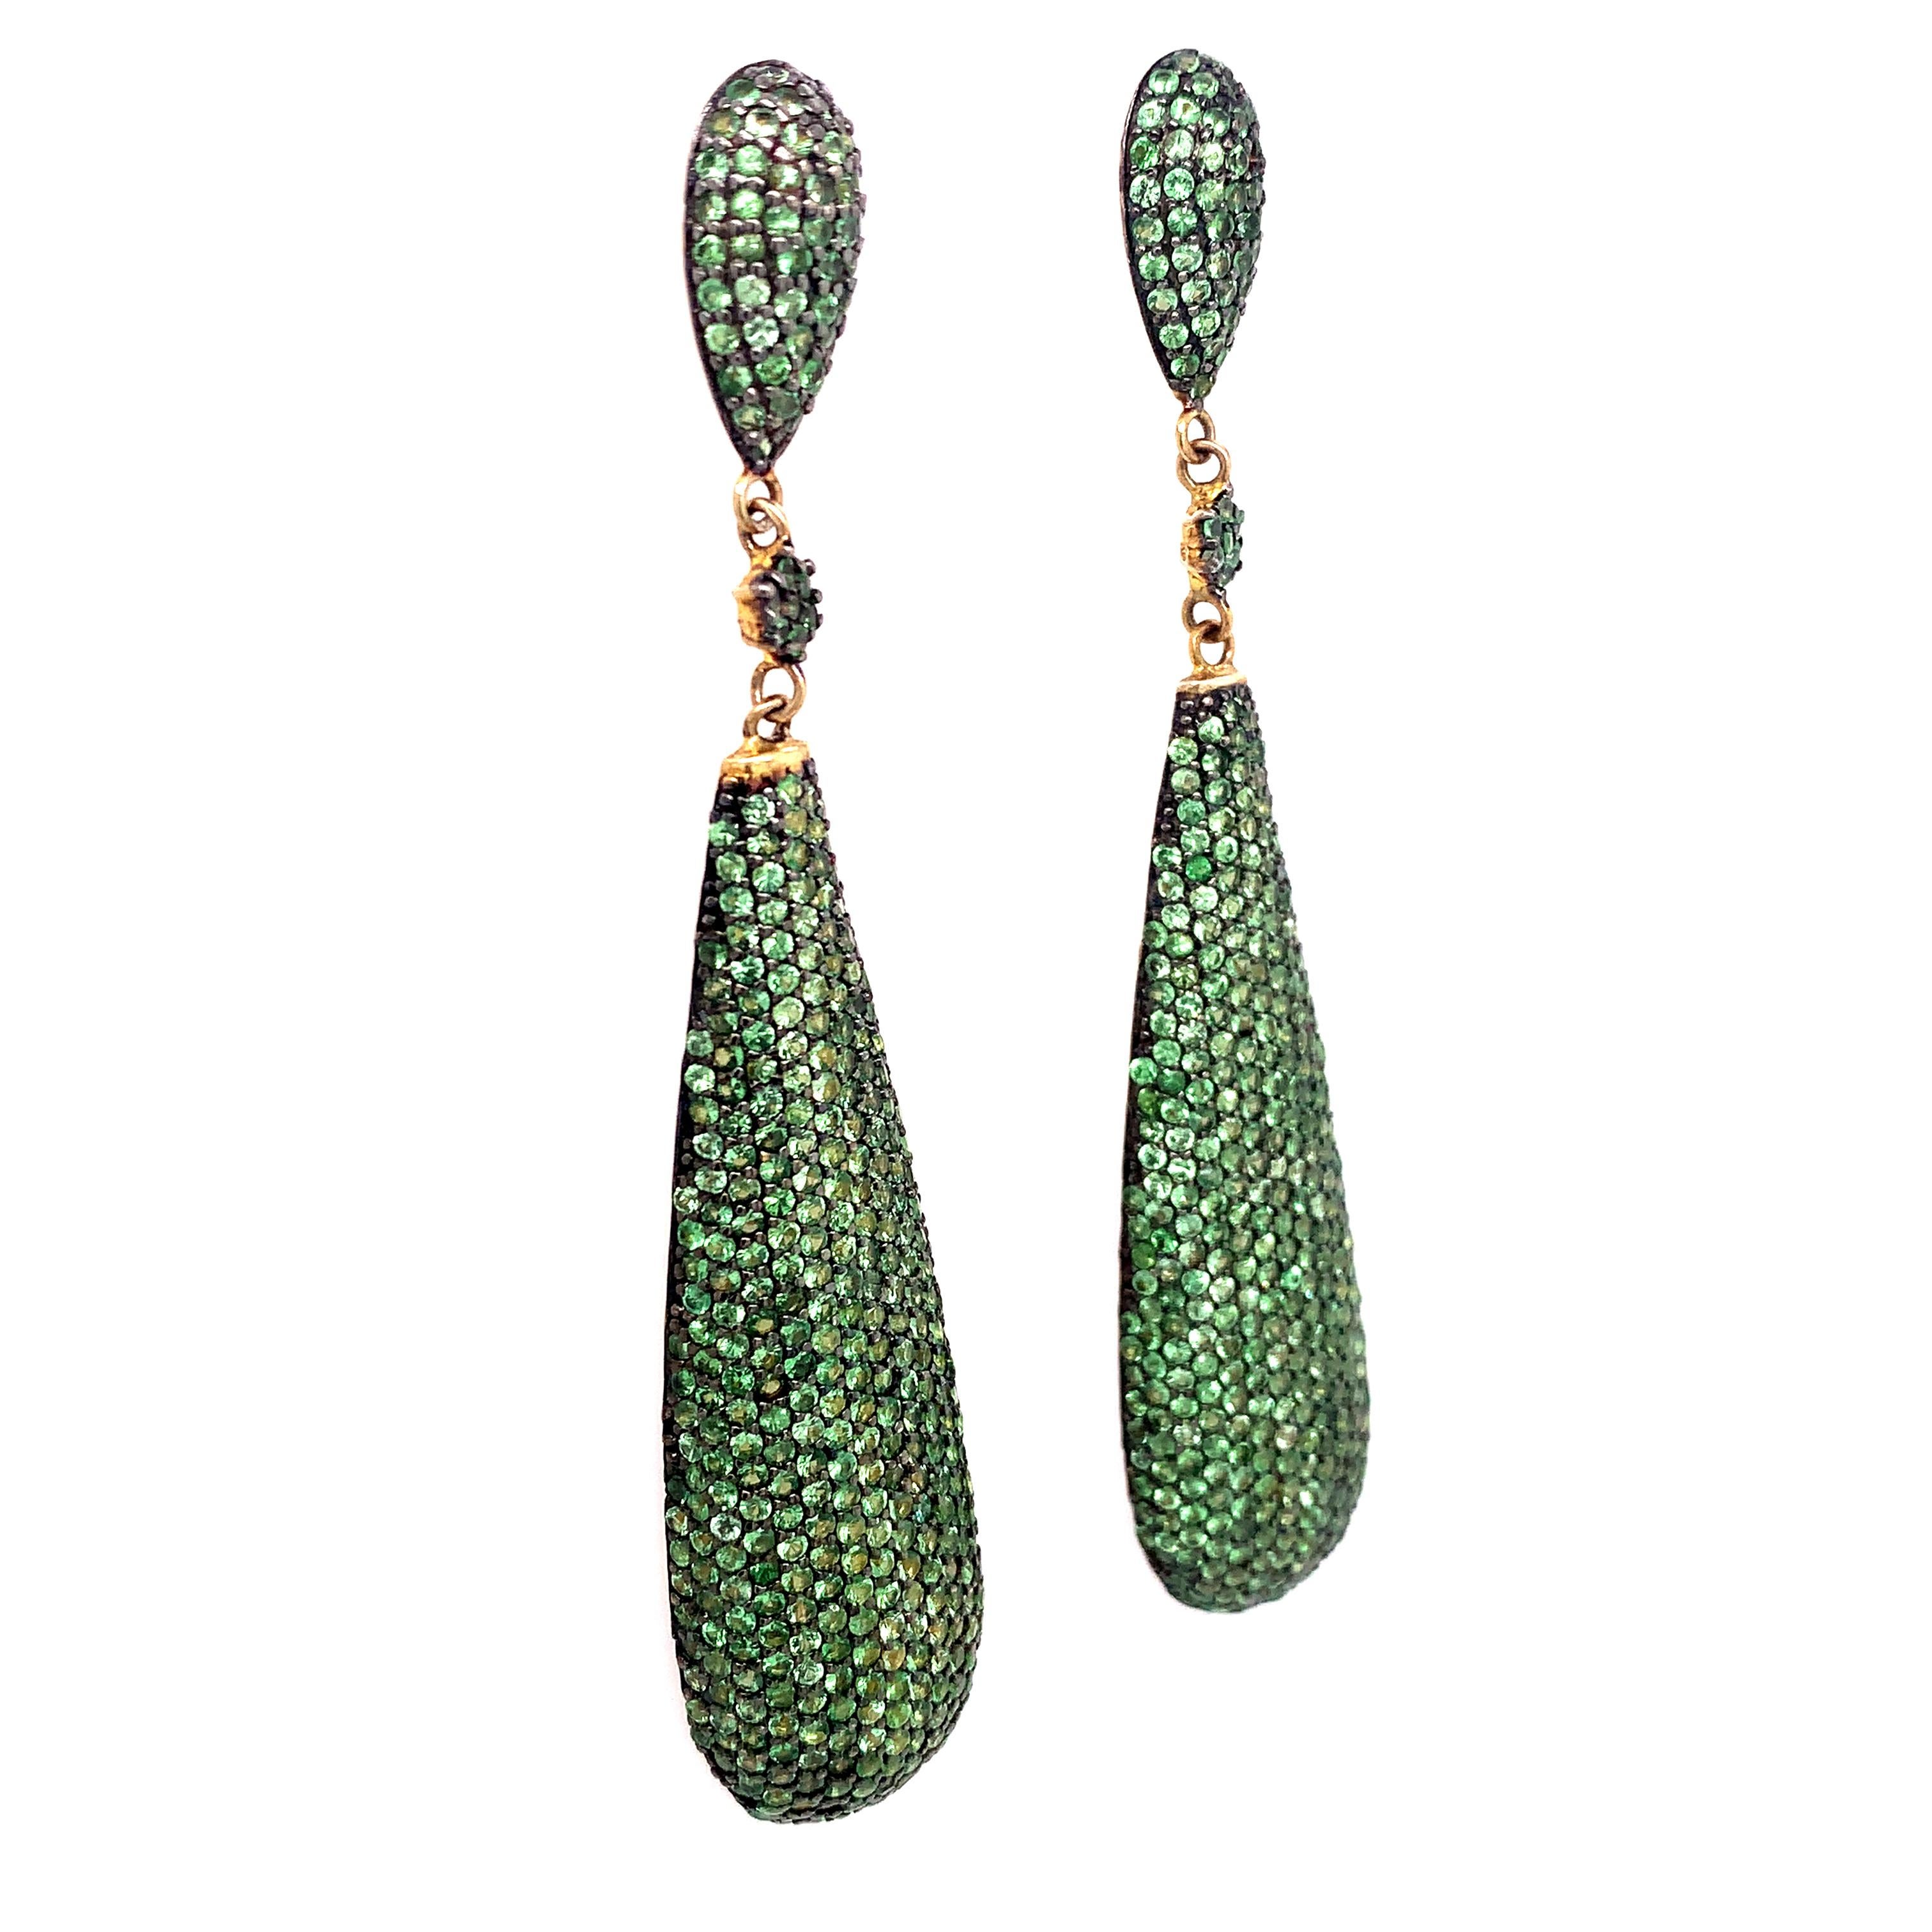 Life In Color Collection 

Bright green Tsavorite Garnet pave pebble elongated earrings set in sterling silver and 14k plated gold

Tsavorite:  11.73ct total weight.
